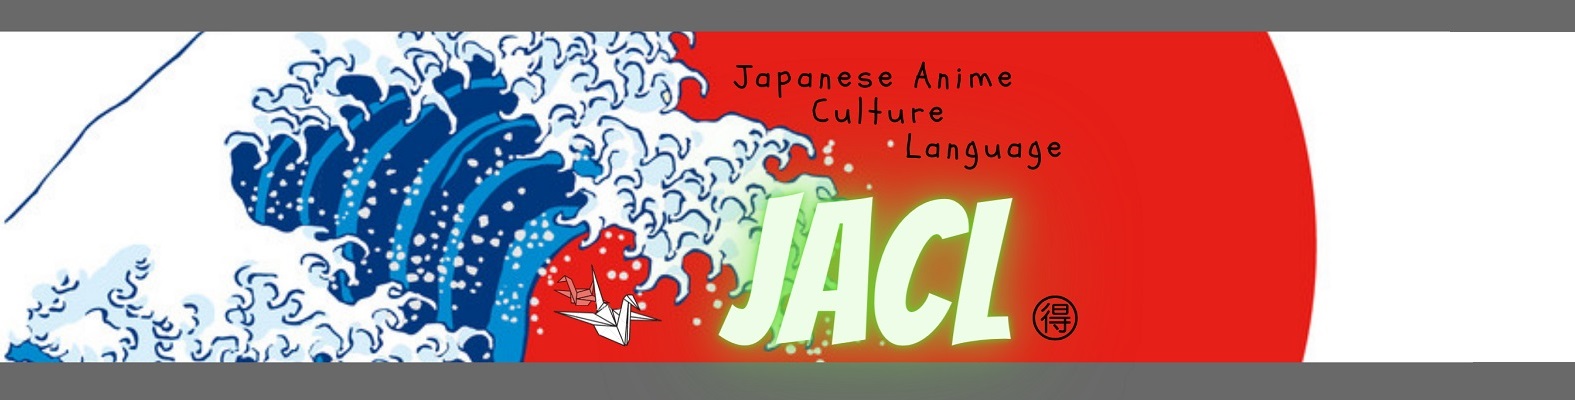 JACL Japanese Anime Culture and Language